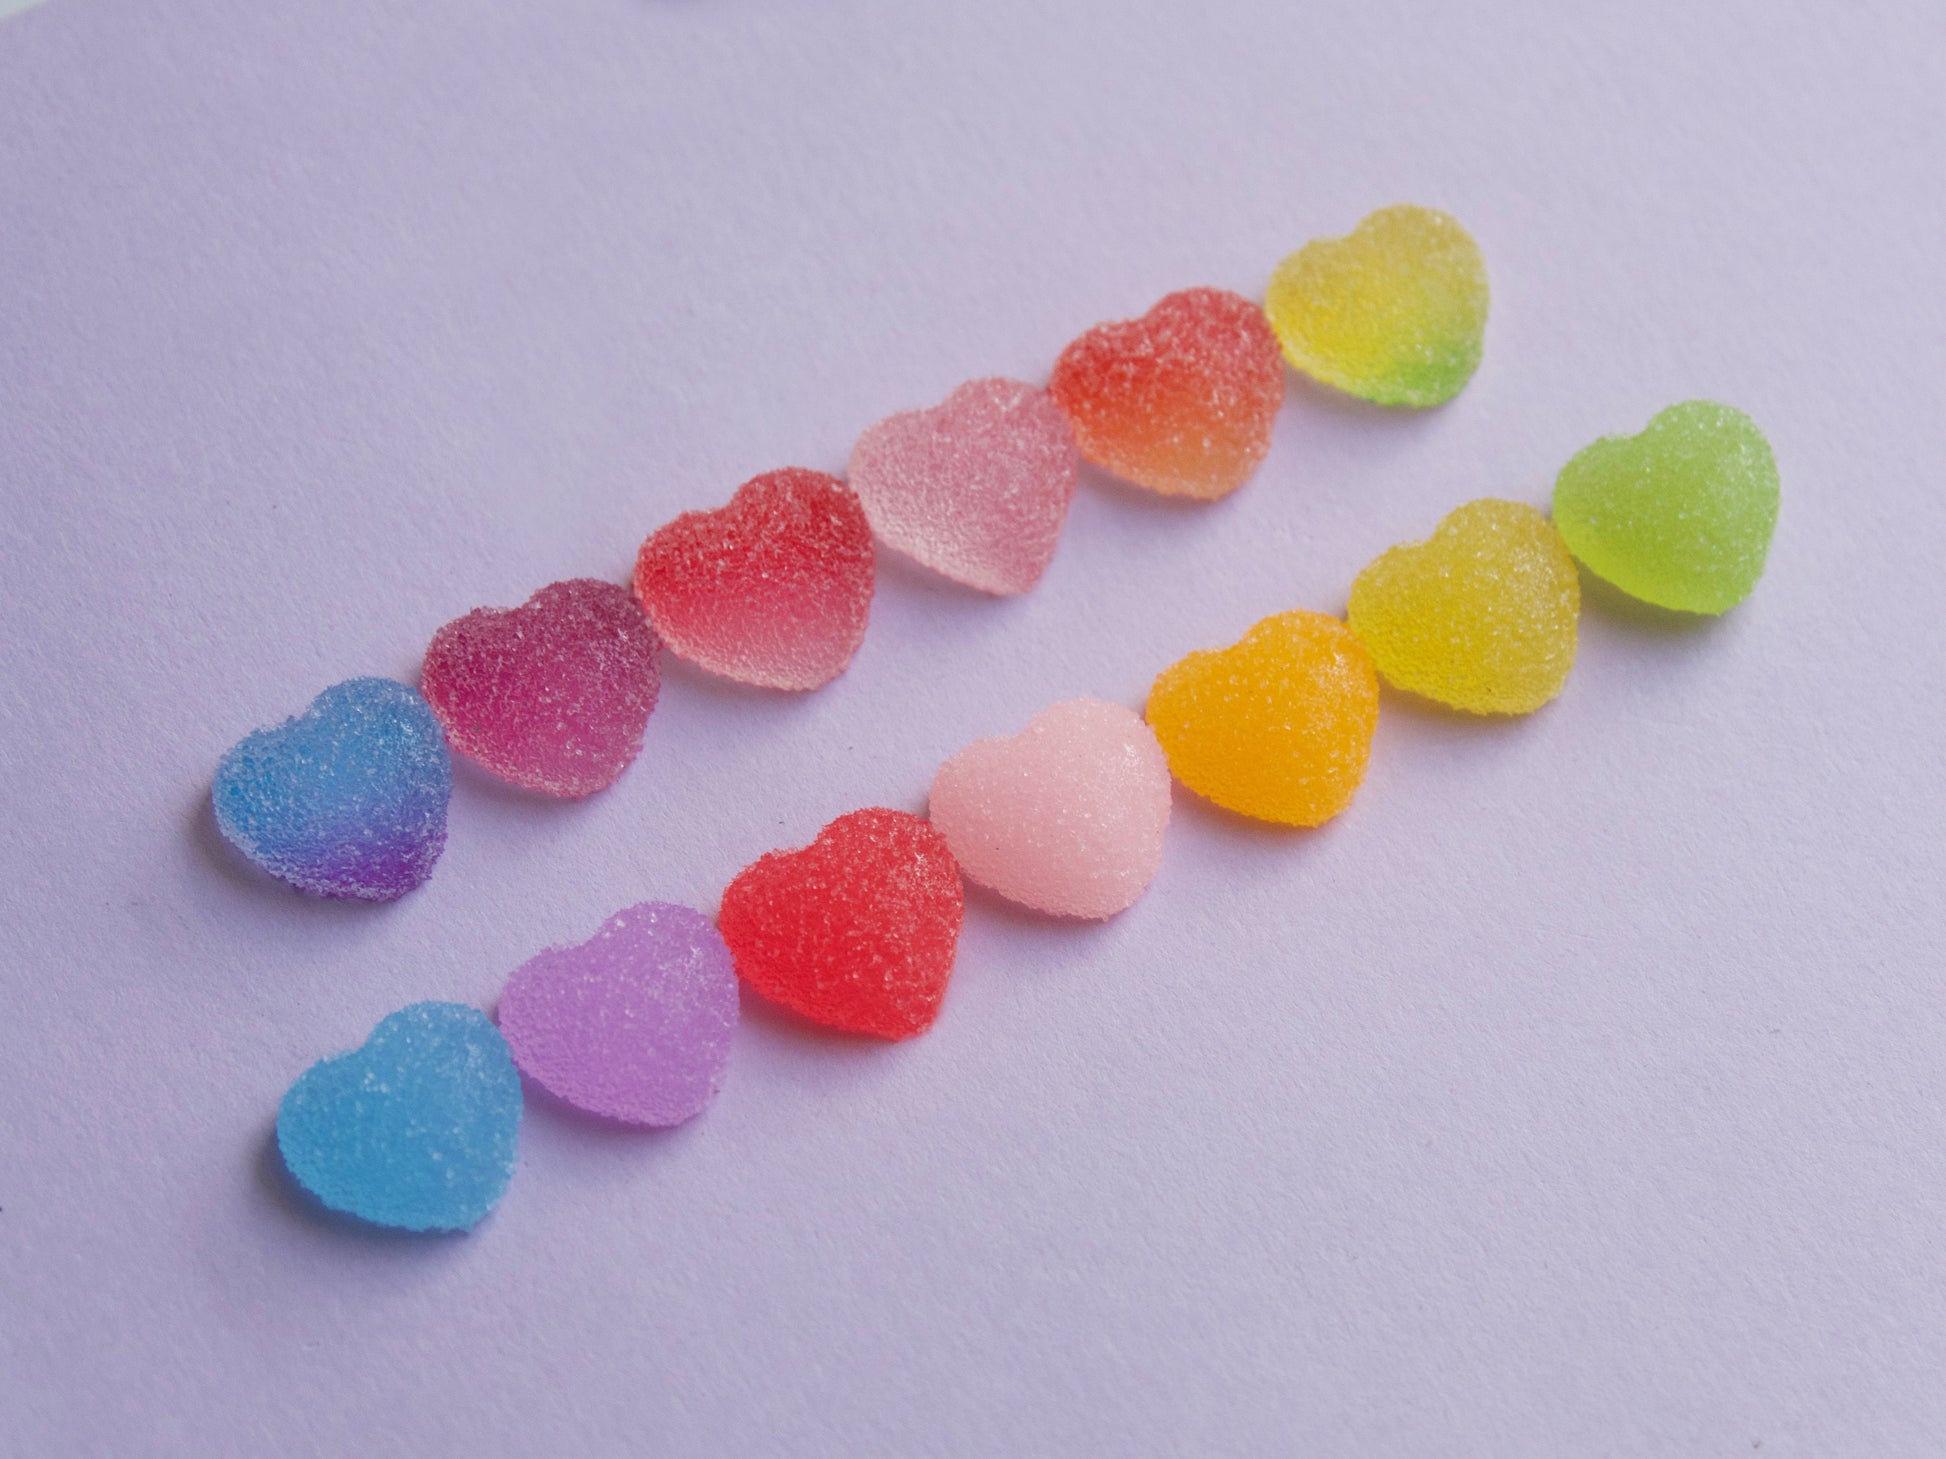 13pcs Candy Gummy Heart Candy Decal/ Sour Jelly Heart 3D Decals 